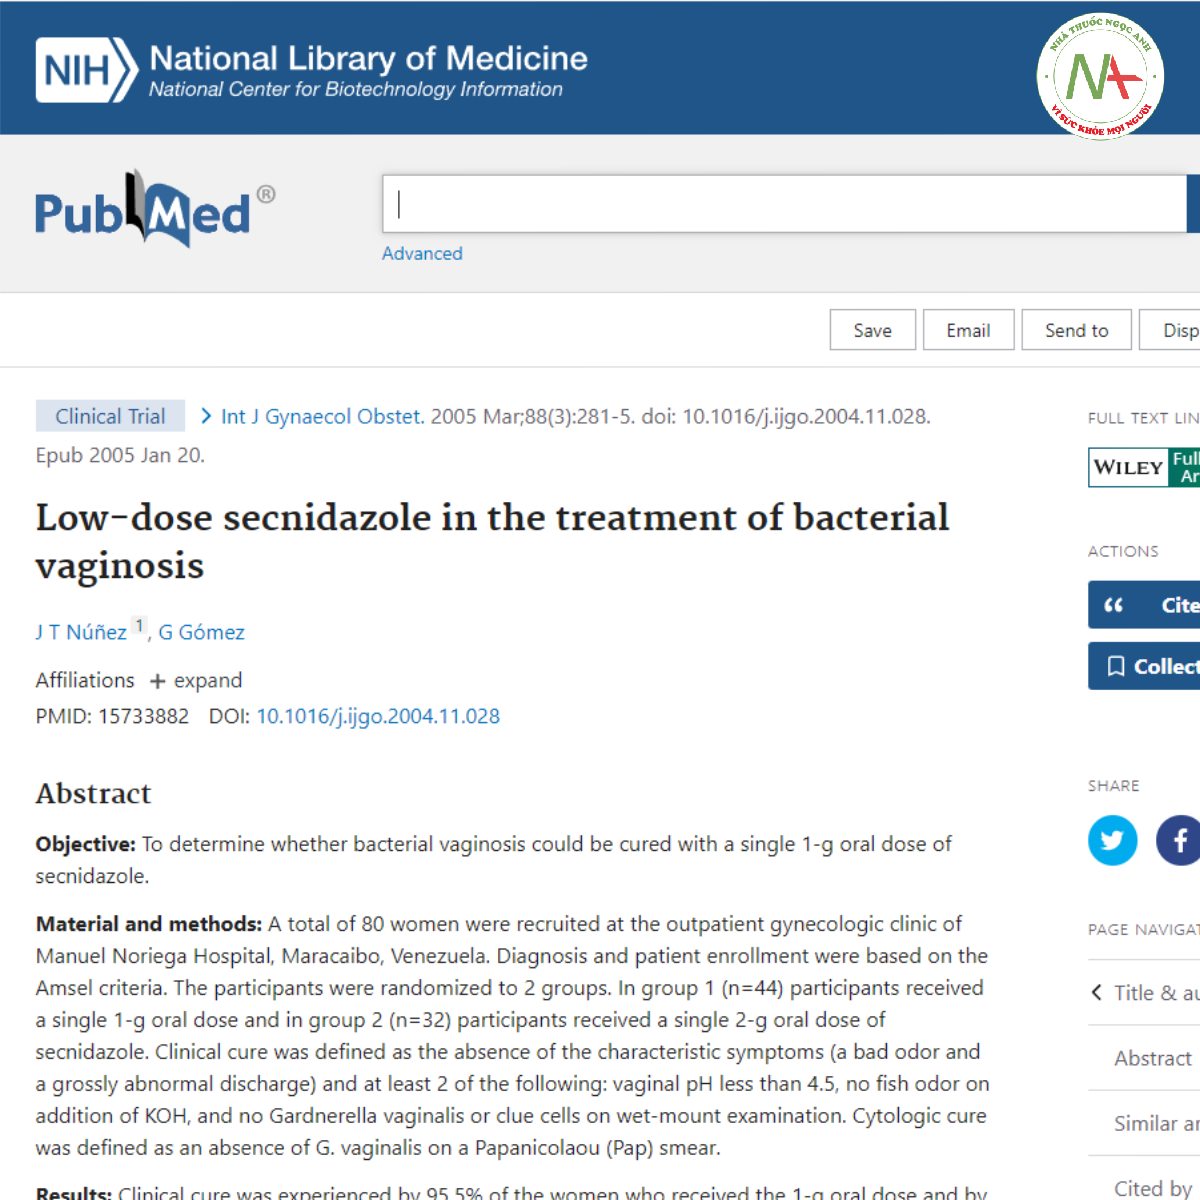 Low-dose secnidazole in the treatment of bacterial vaginosis